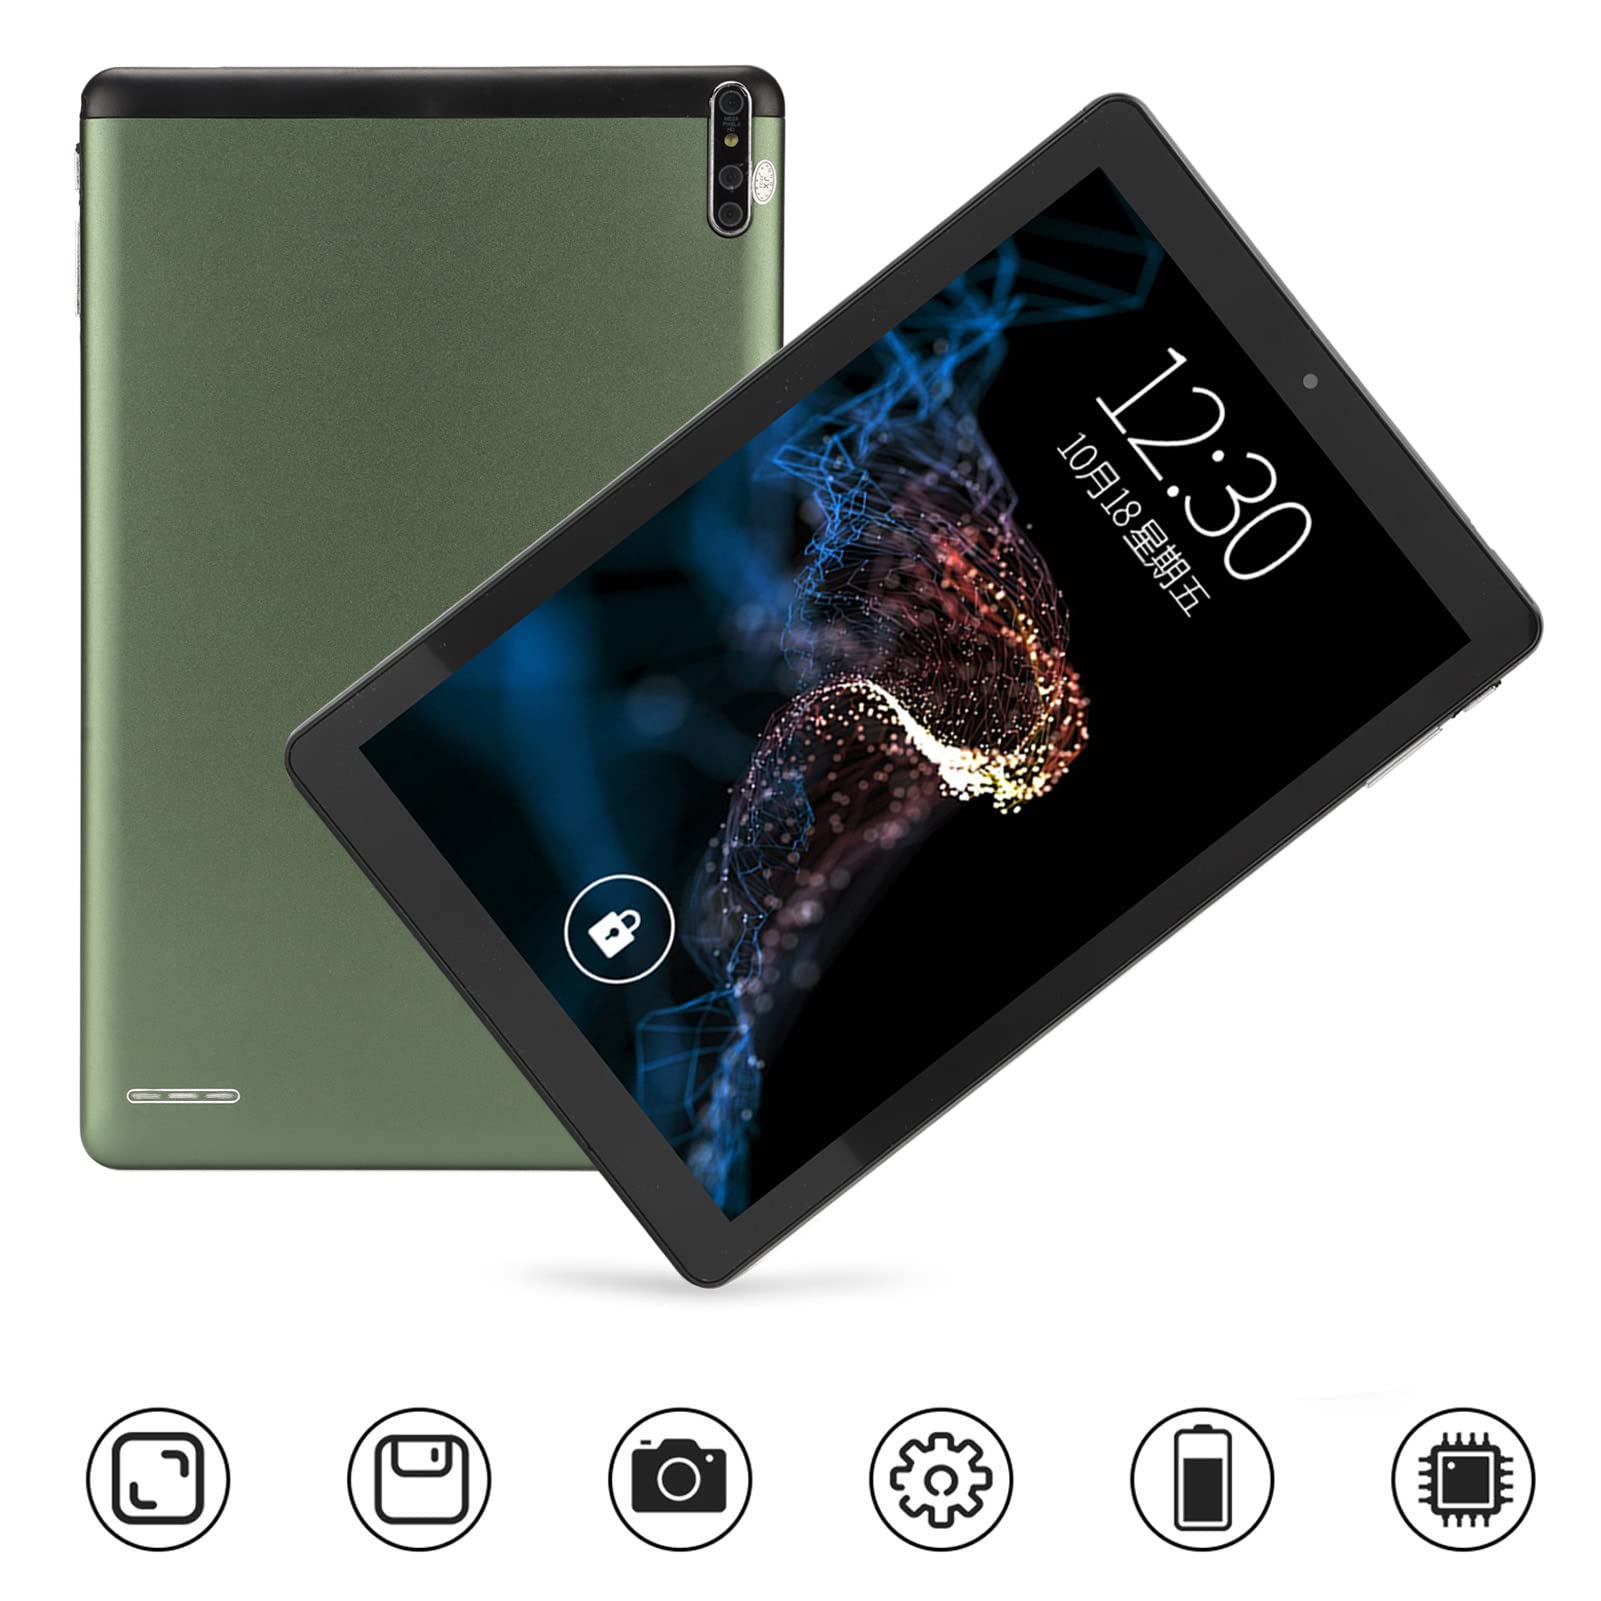 Kufoo HD Tablet, 10.1 Inch Green Tablet 8800mAh 6GB 128GB 2.4G 5G WiFi for 11.0 for Reading (US Plug)